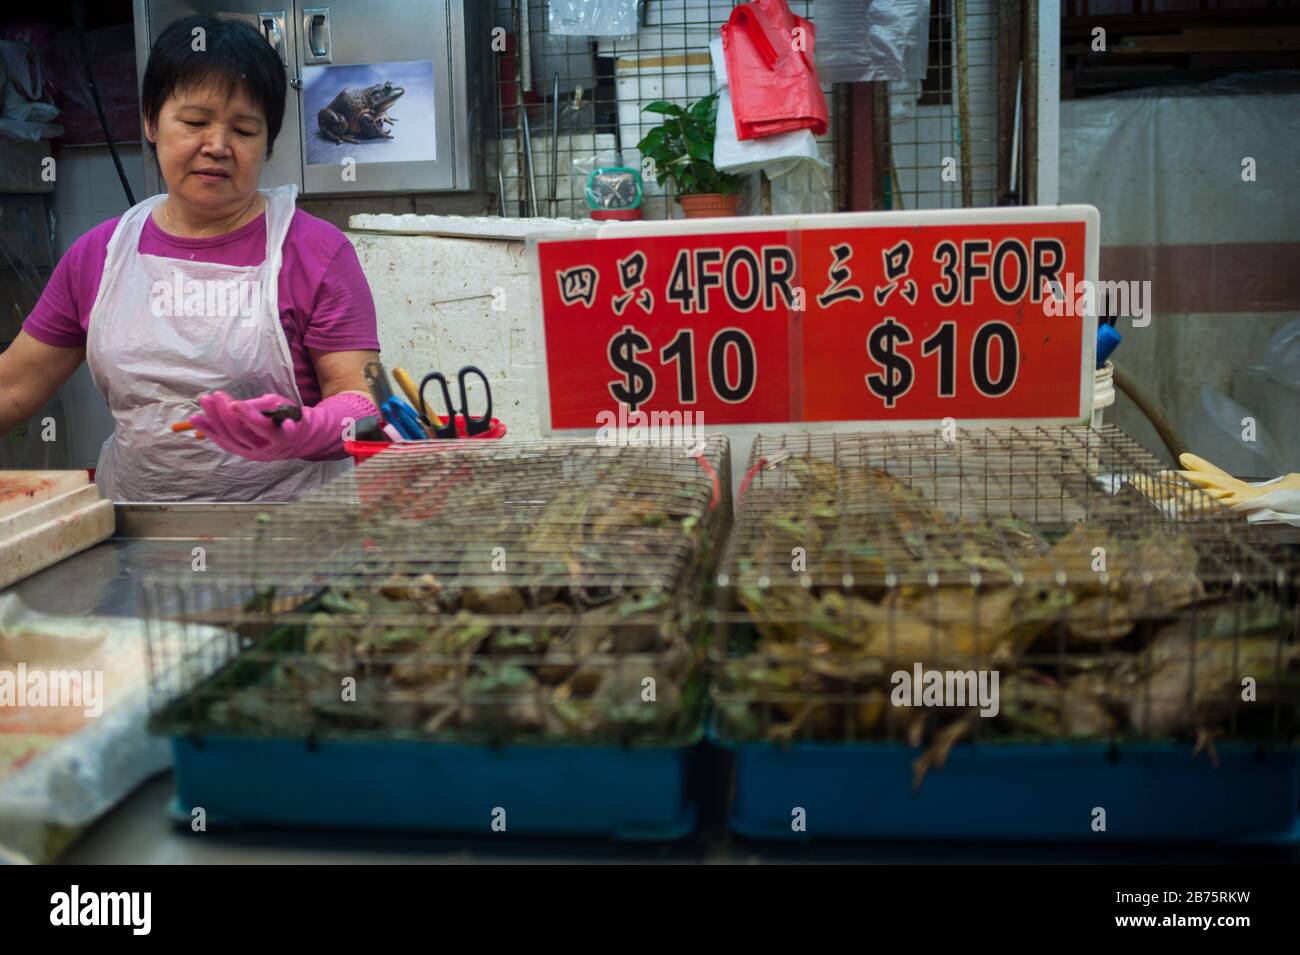 20.07.2017, Singapore, Republic of Singapore, Asia - A woman sells live frogs at a stand in the Chinatown market. [automated translation] Stock Photo